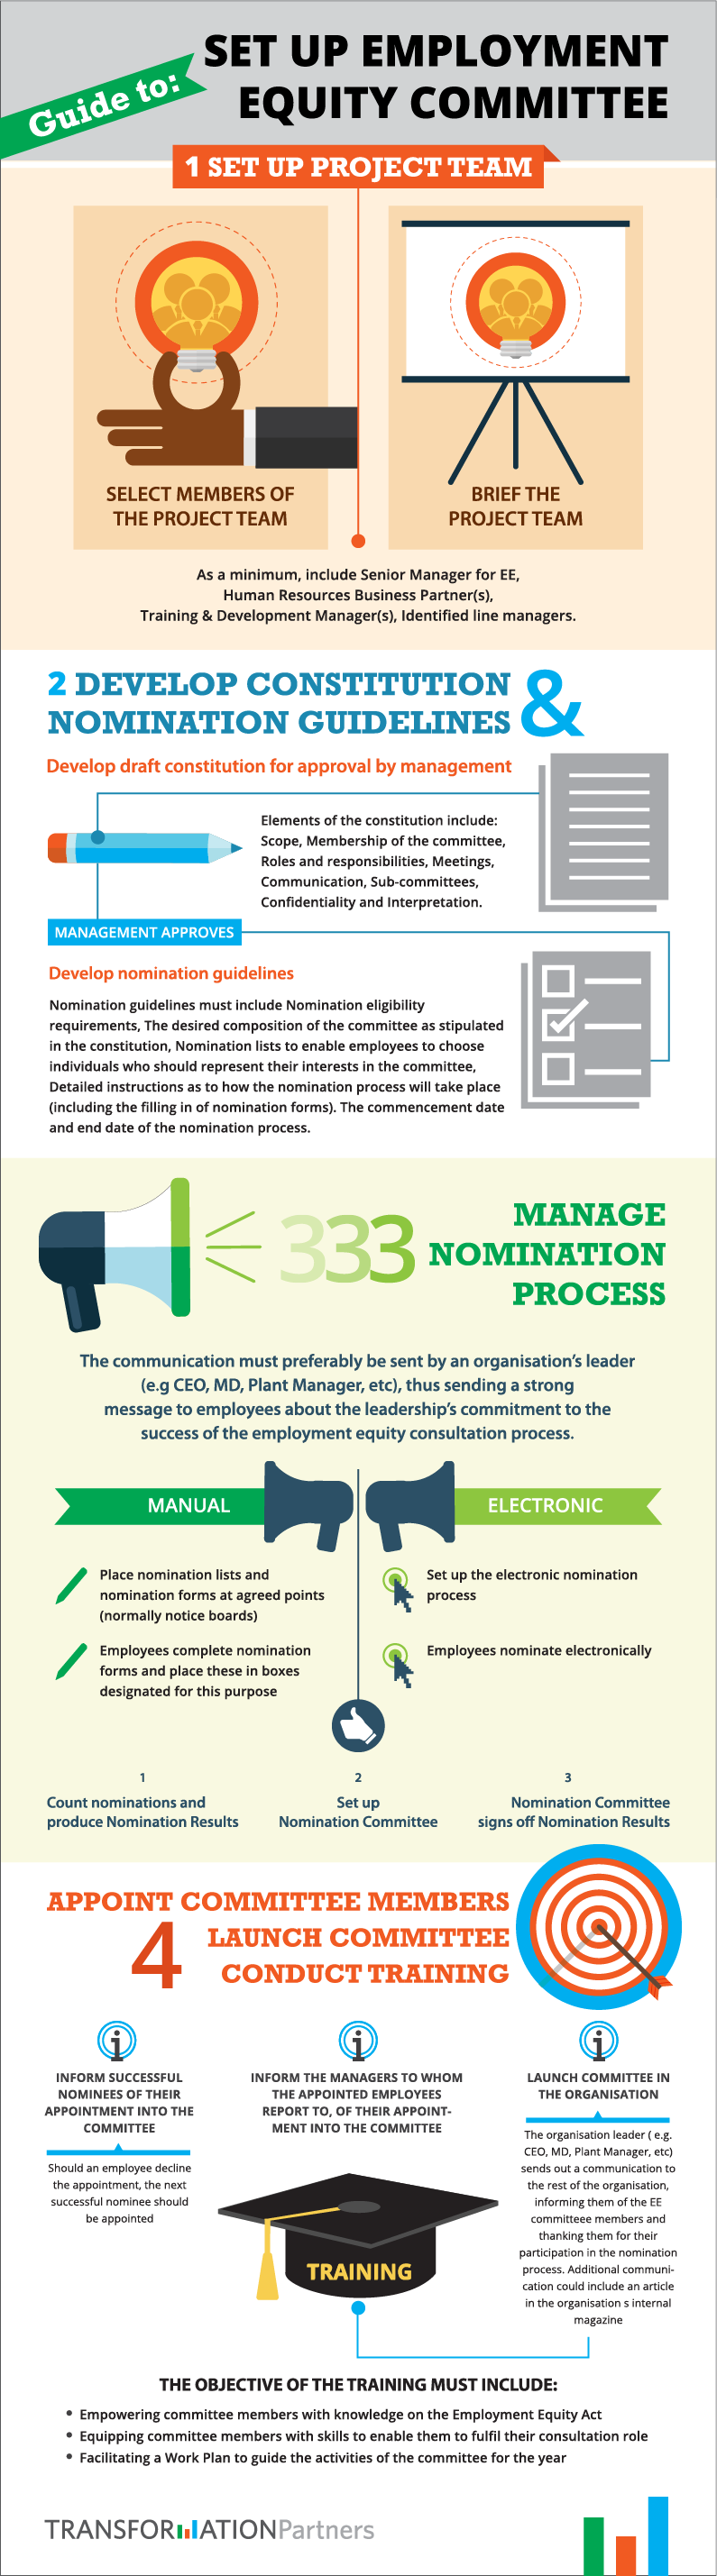 Infographic on how to set up Employment Equity Committee